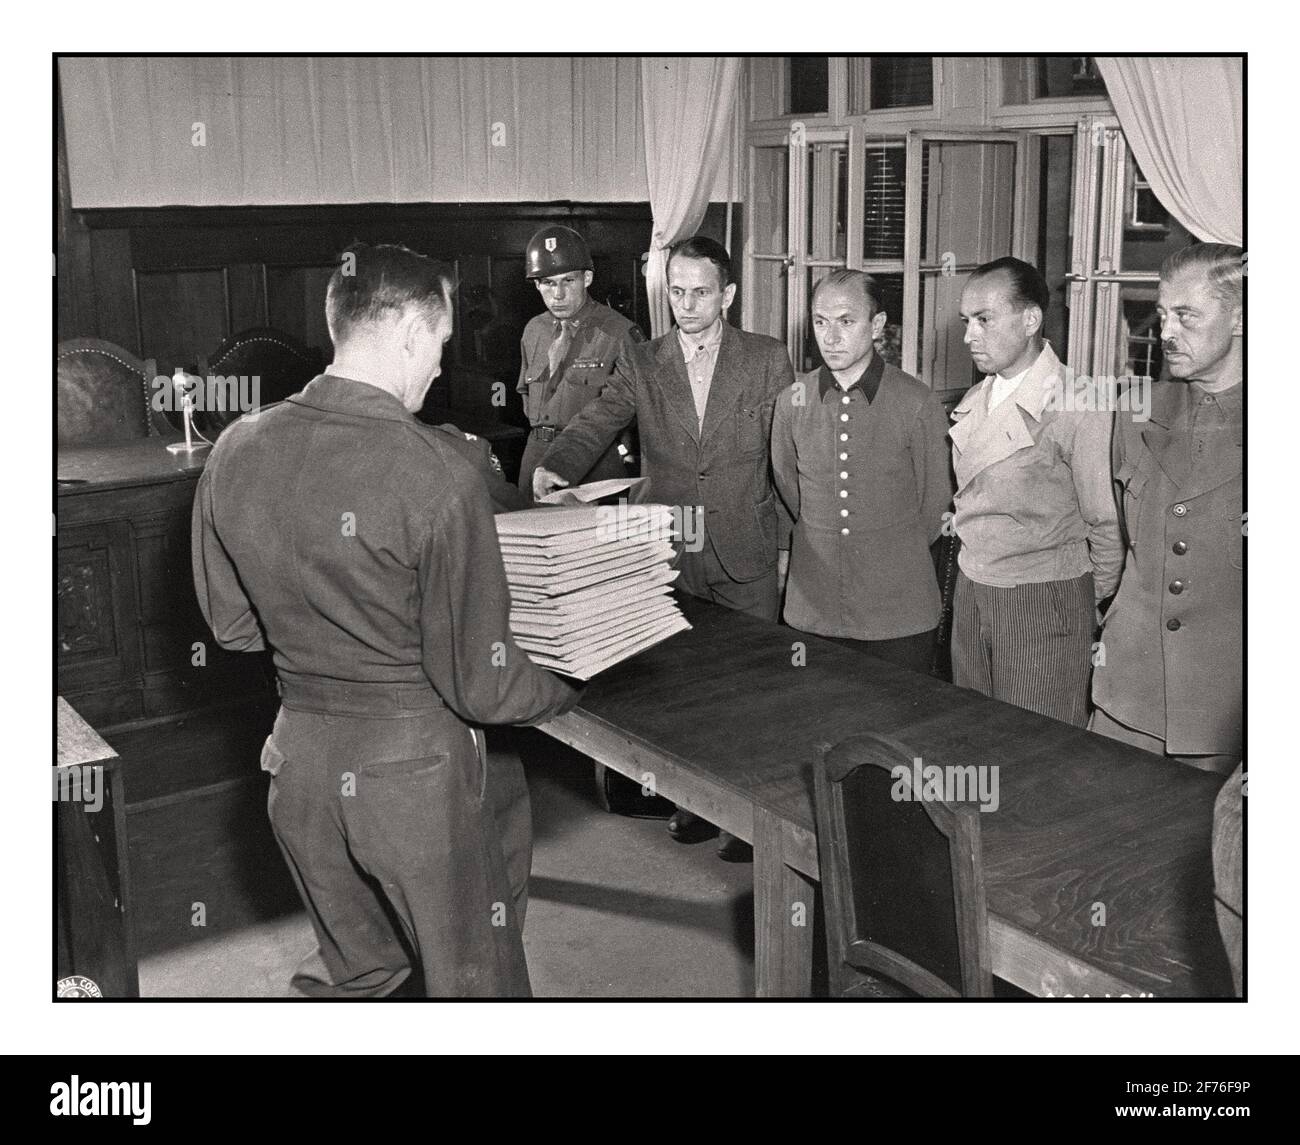 NAZI GERMANY WAR CRIMES NUREMBERG  Defendant Otto Ohlendorf (left) receives his indictment from Col. C.W. Mays, Marshal of the Military Tribunal, before the Einsatzgruppen Trial. The other defendants (left to right) are, Heinz Jost, Erich Naumann, and Erwin Schulz. Stock Photo